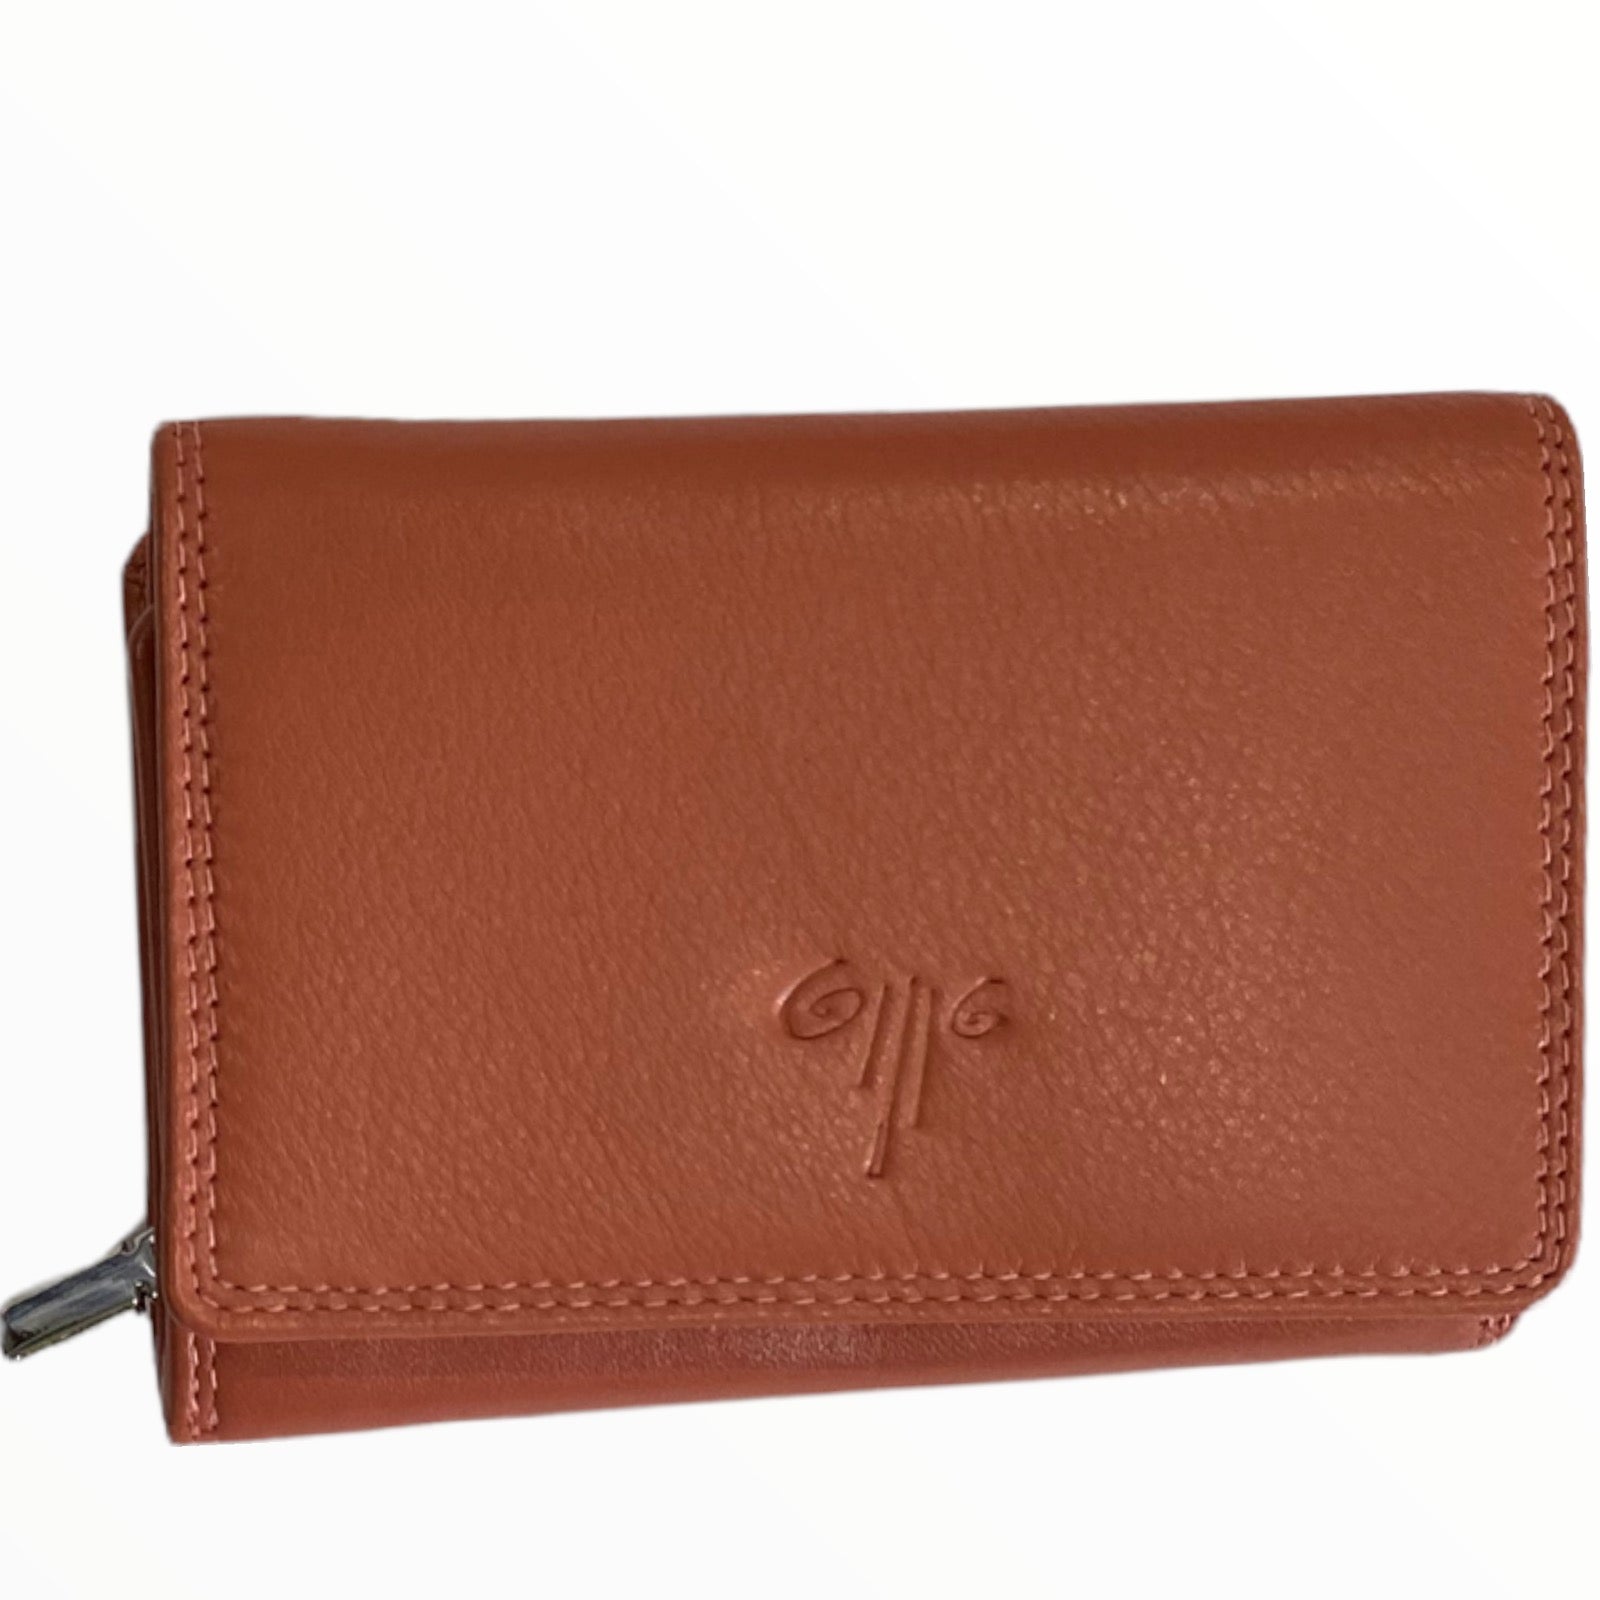 Peach leather wallet small size